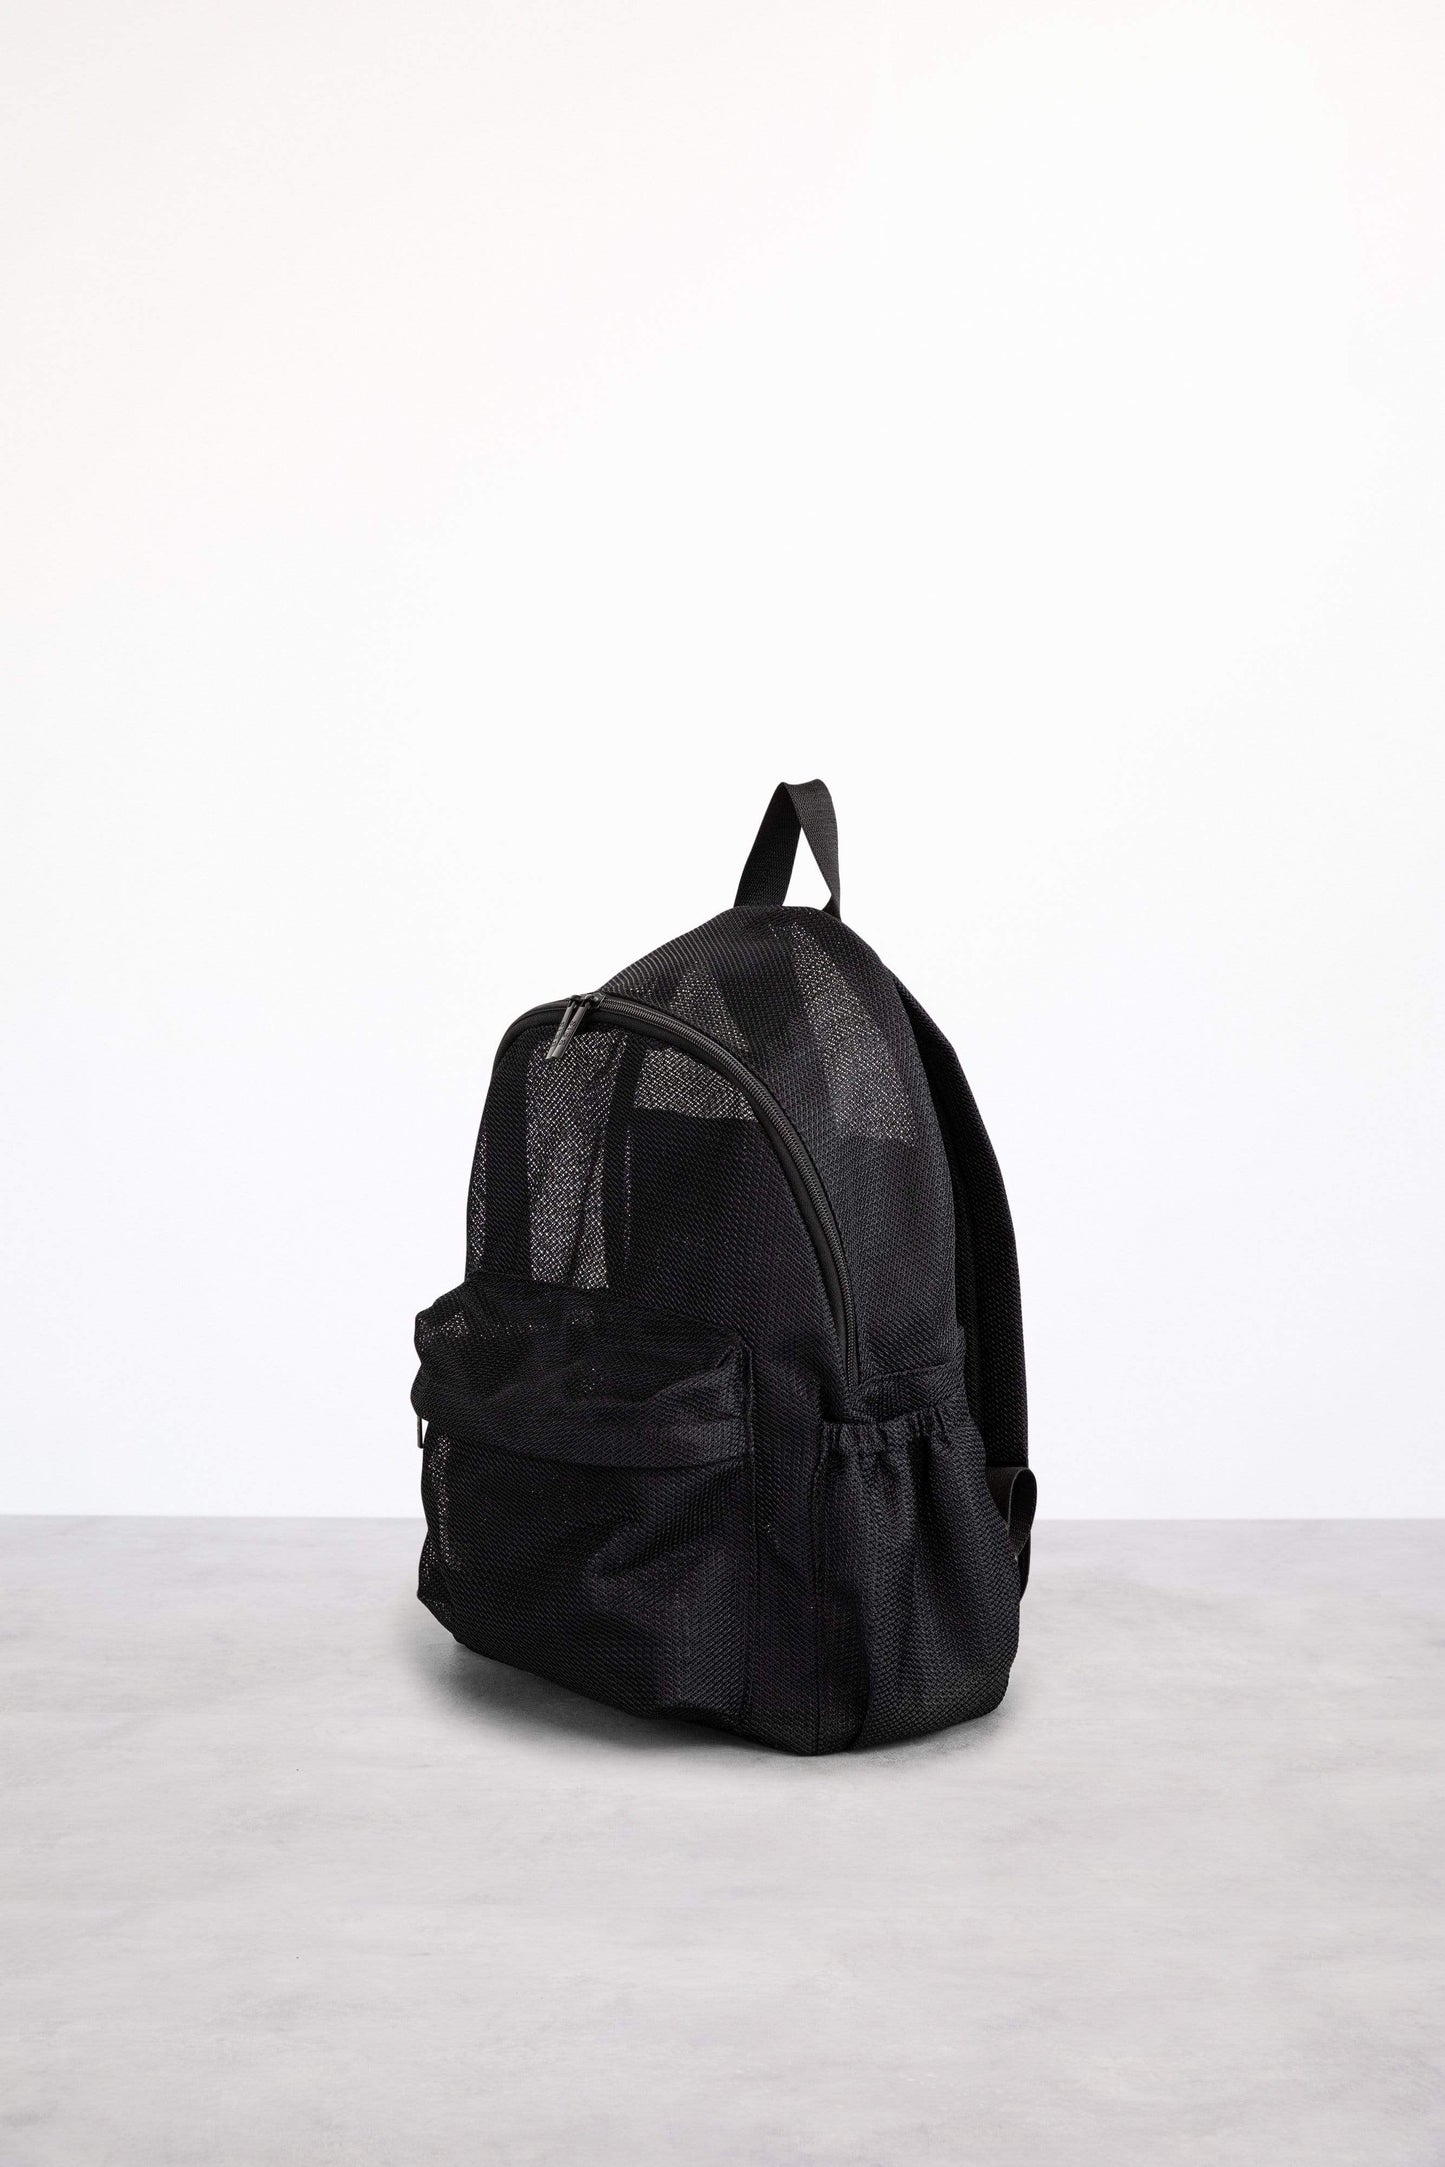 The Packable Backpack in Black